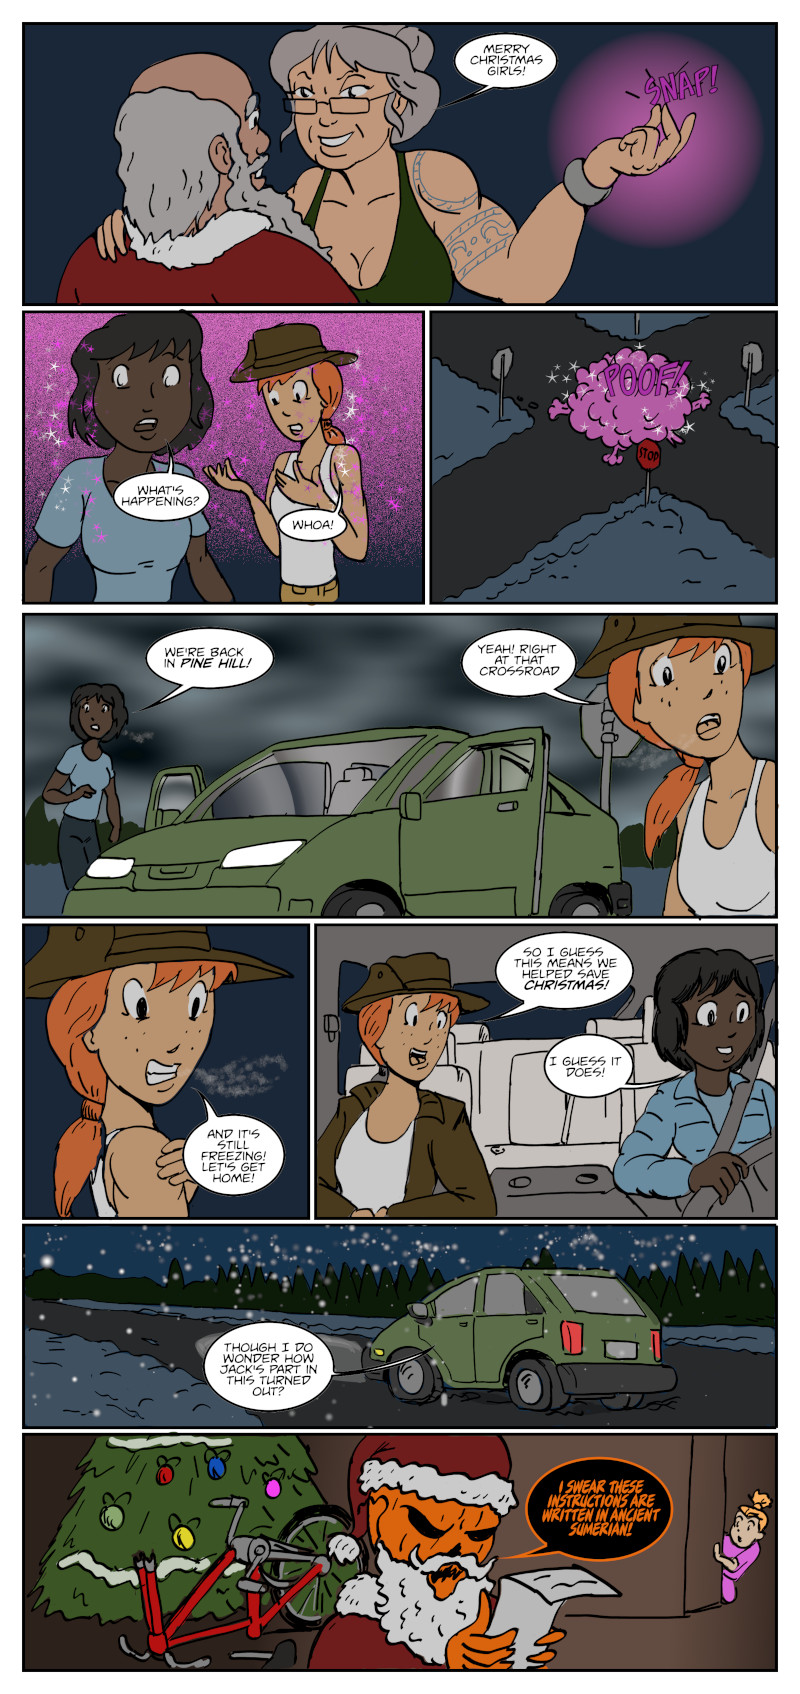 Pine Hill Creature Feature by Jay042 Page 7 of 7